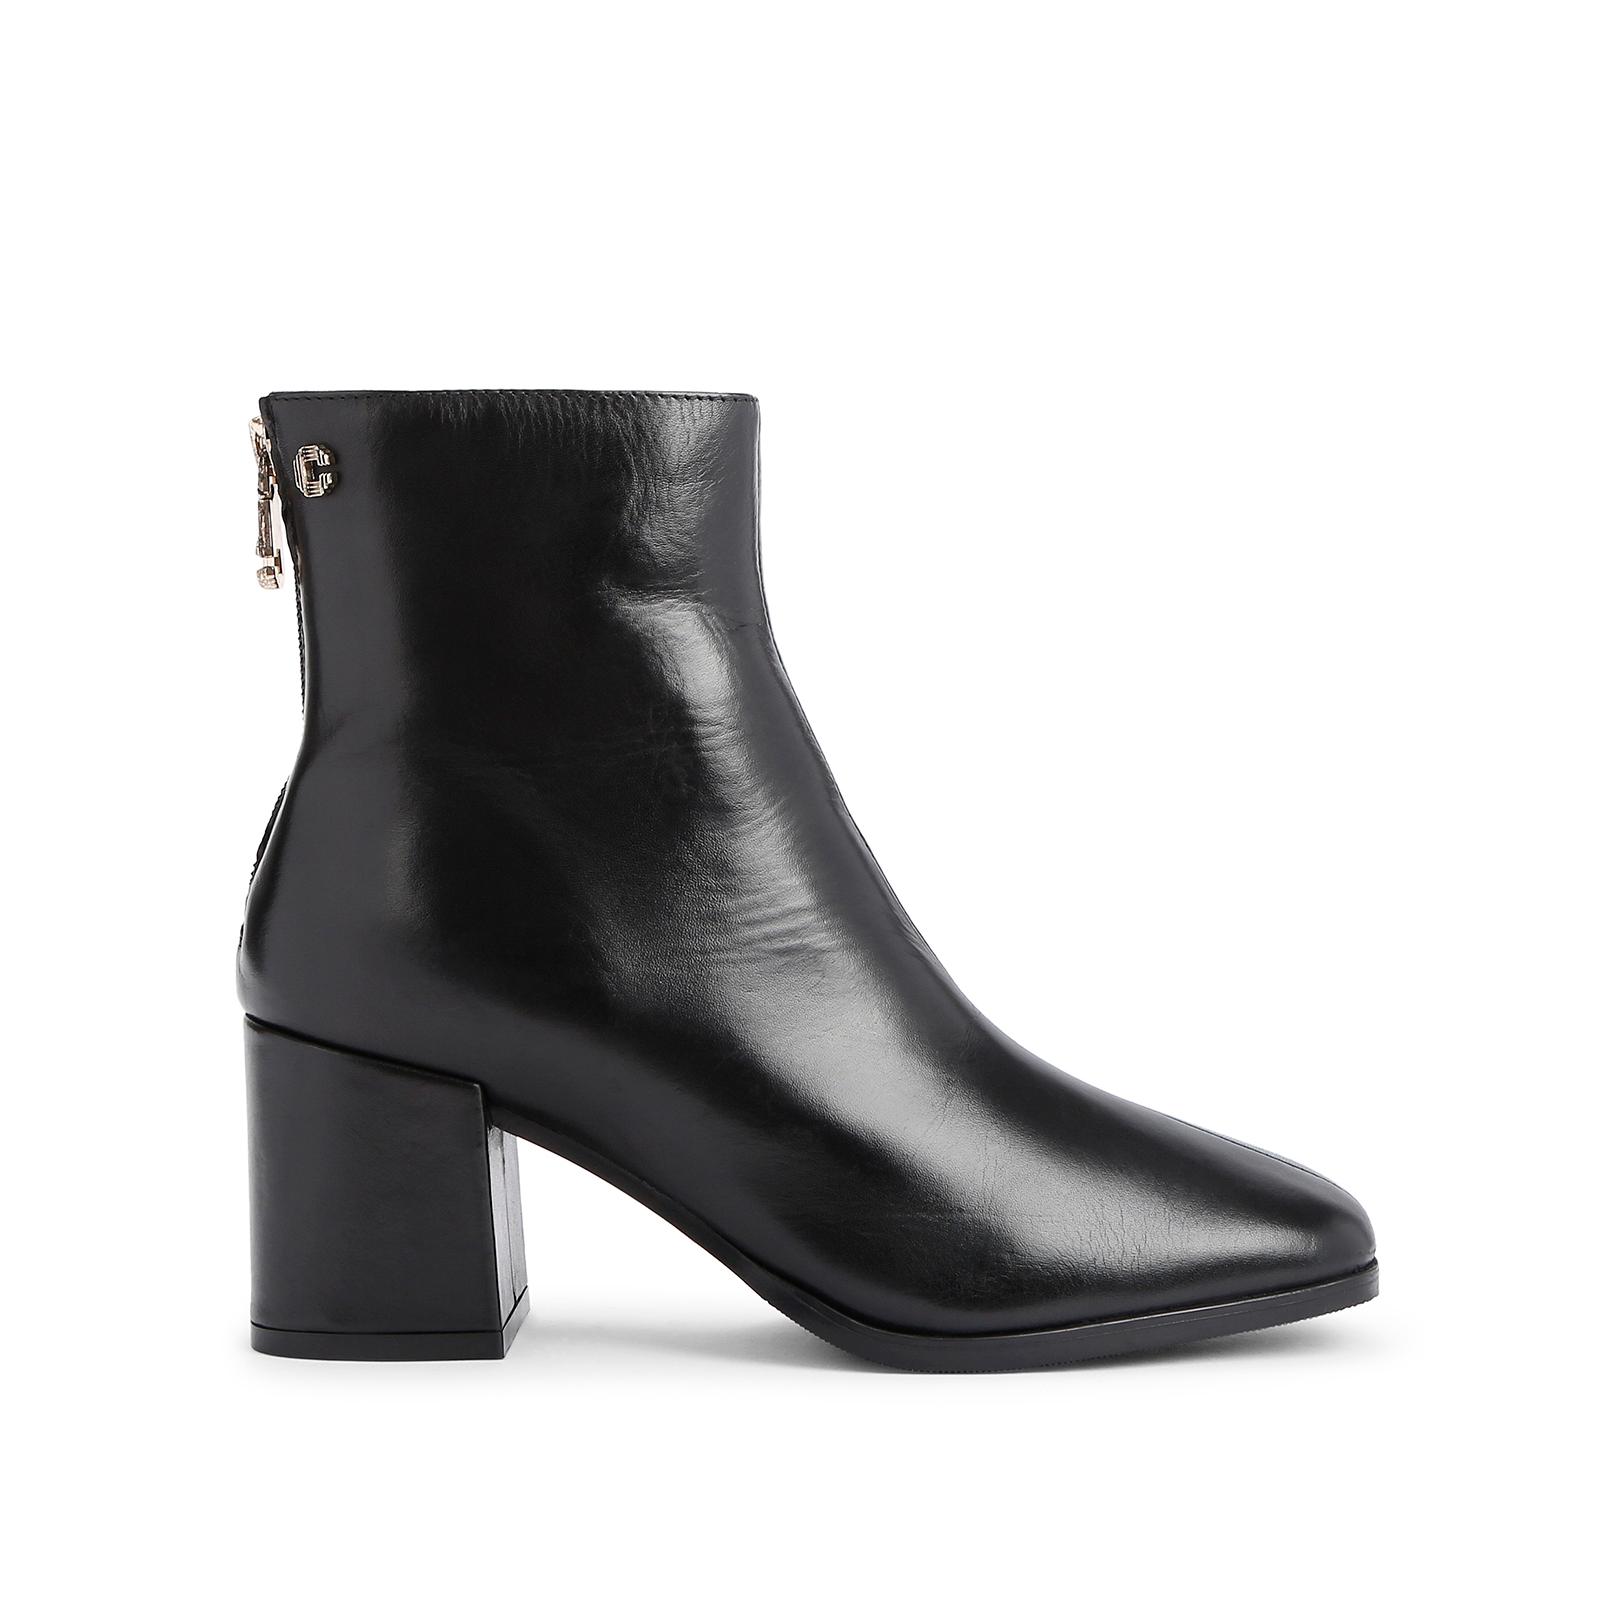 SOOTHE ANKLE - CARVELA COMFORT Ankle Boots